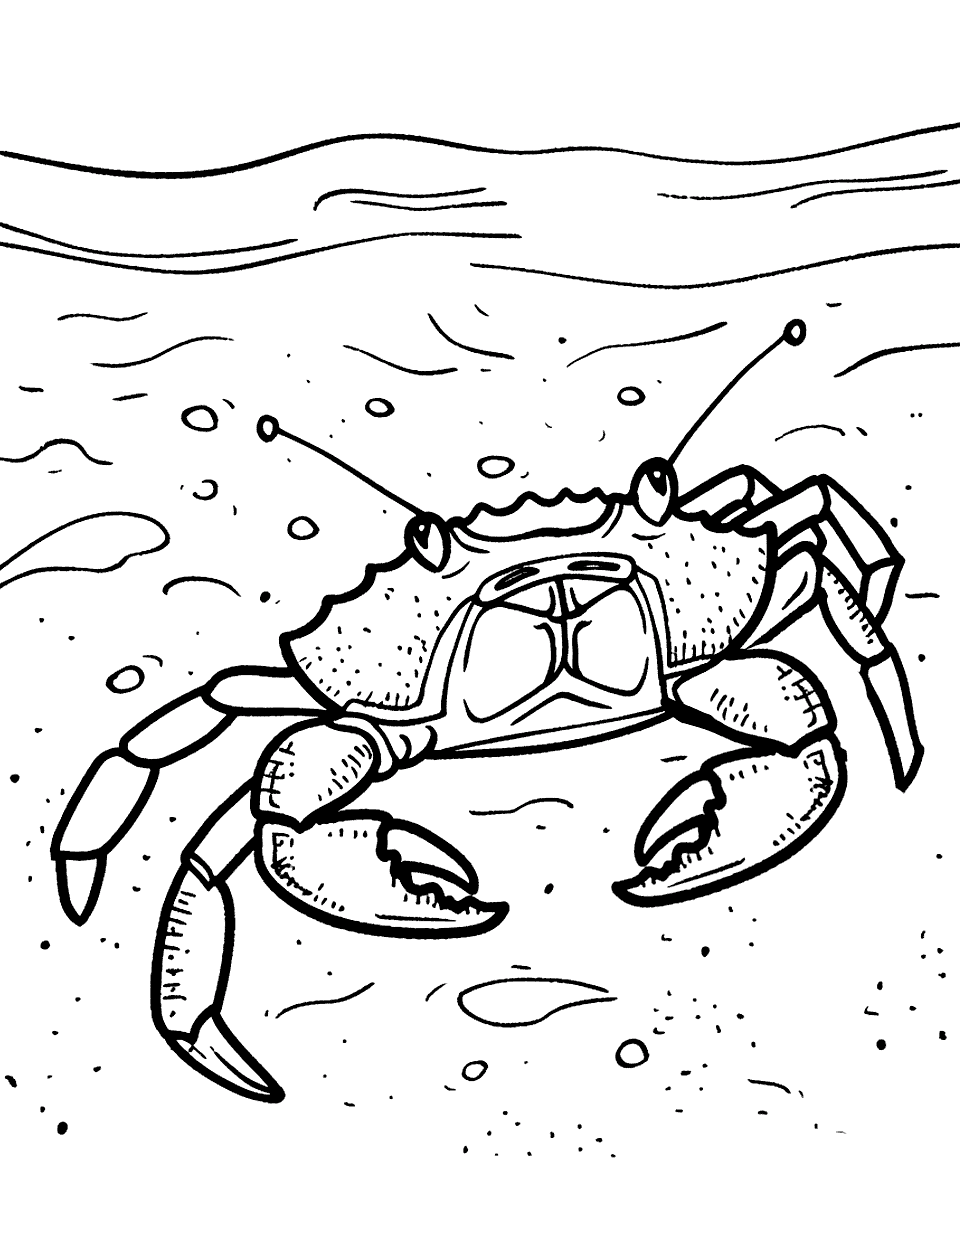 Crab Scurrying Along the Shore Sea Creature Coloring Page - A small crab moves sideways along the sandy shore.